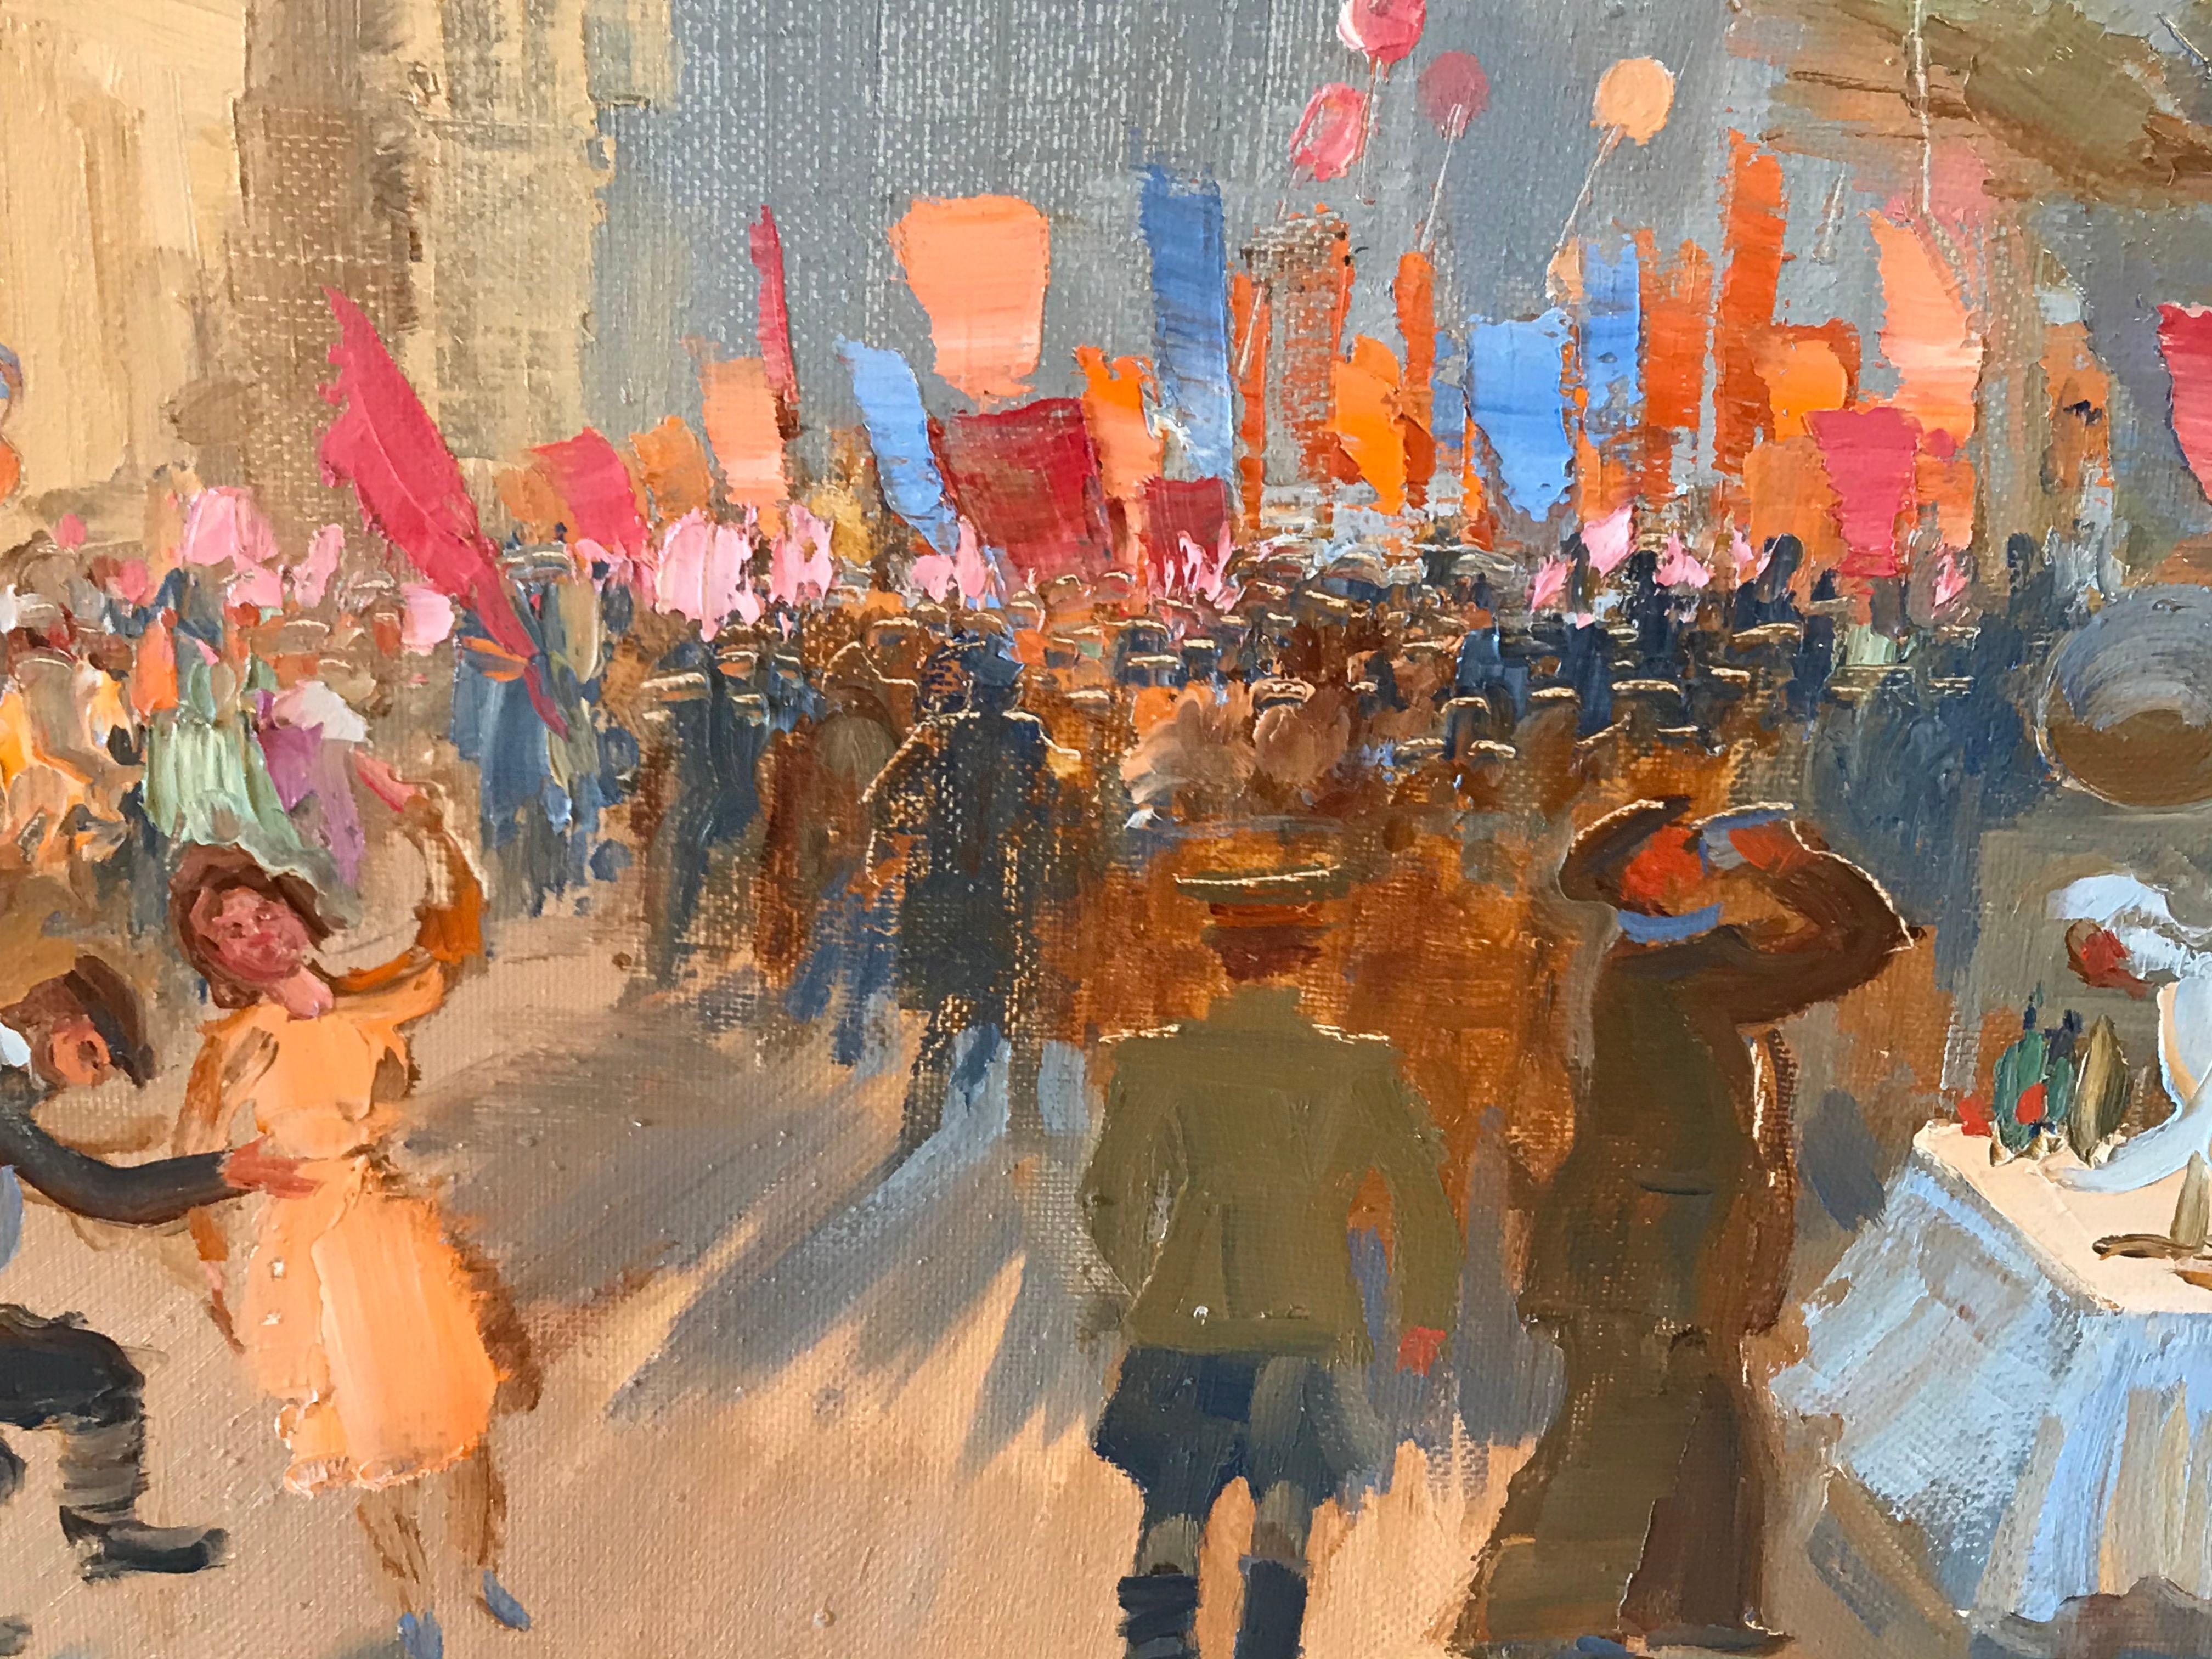 Painted Oil Painting of the Russian National Day Celebration by Molodtsov For Sale